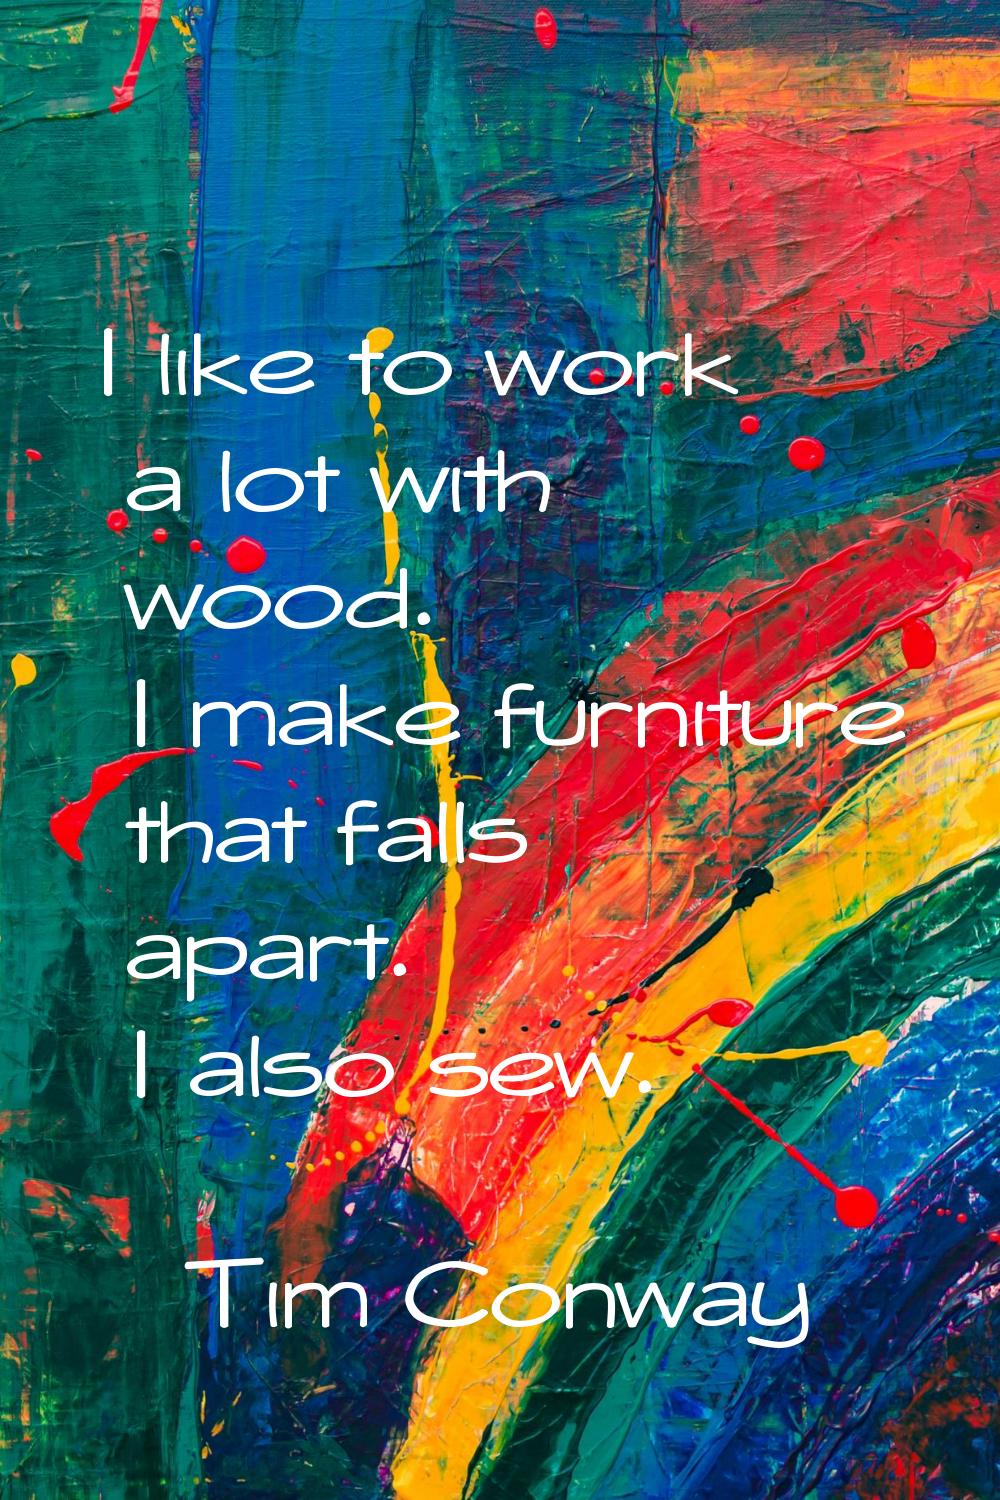 I like to work a lot with wood. I make furniture that falls apart. I also sew.